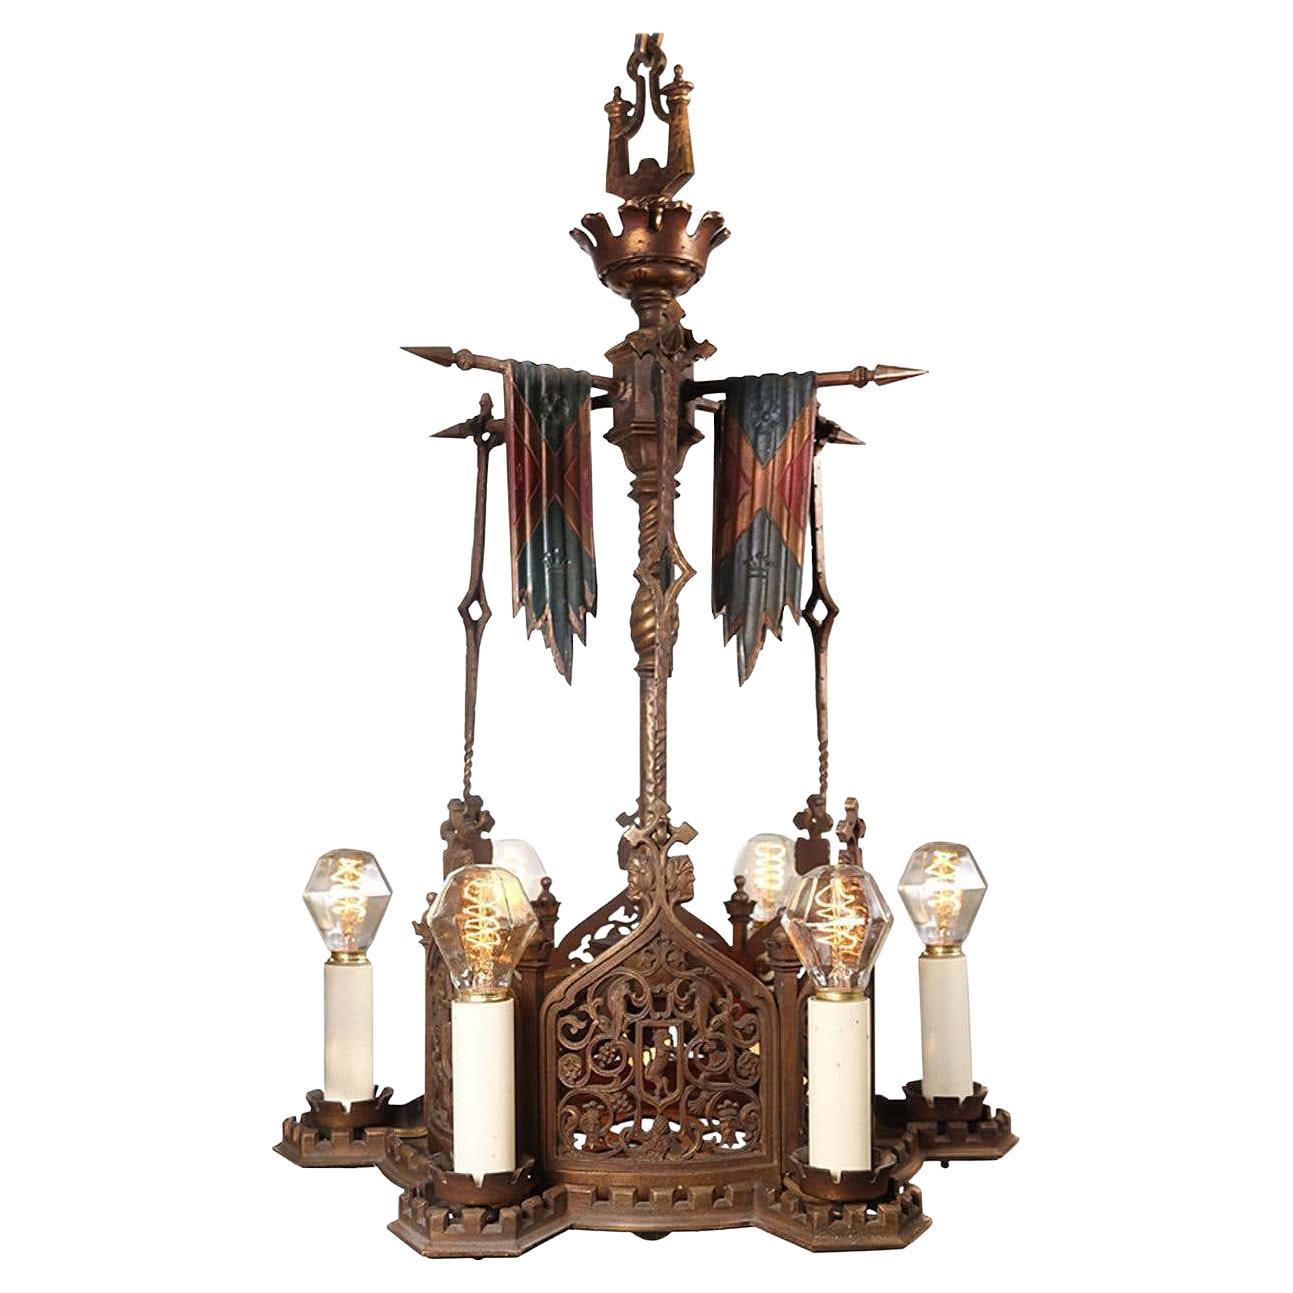 Cold-Painted Bronze Spanish Revival Chandelier